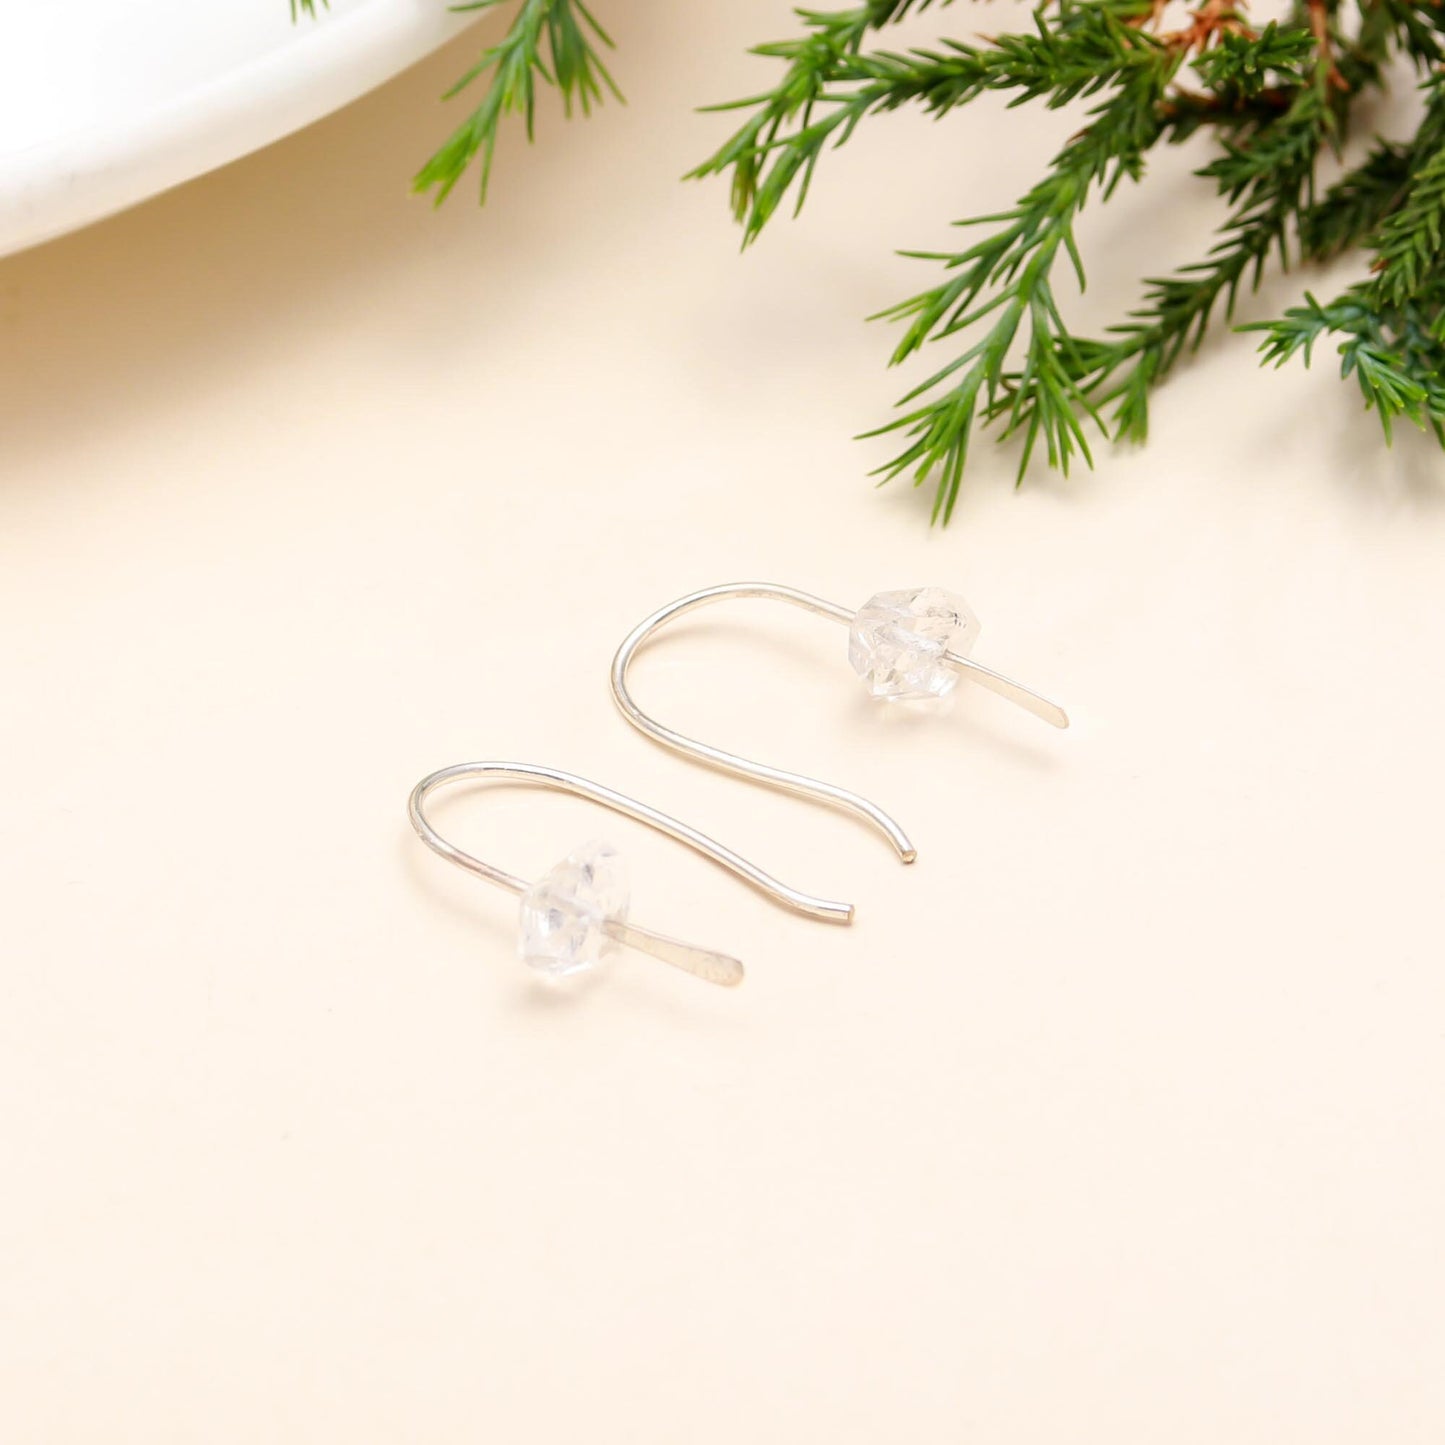 Natural Raw Herkimer Diamond Crystal Handmade Earrings, Solid 925 Silver, Gift for her, Anniversary, Silver, Gold Finish April Birthstone